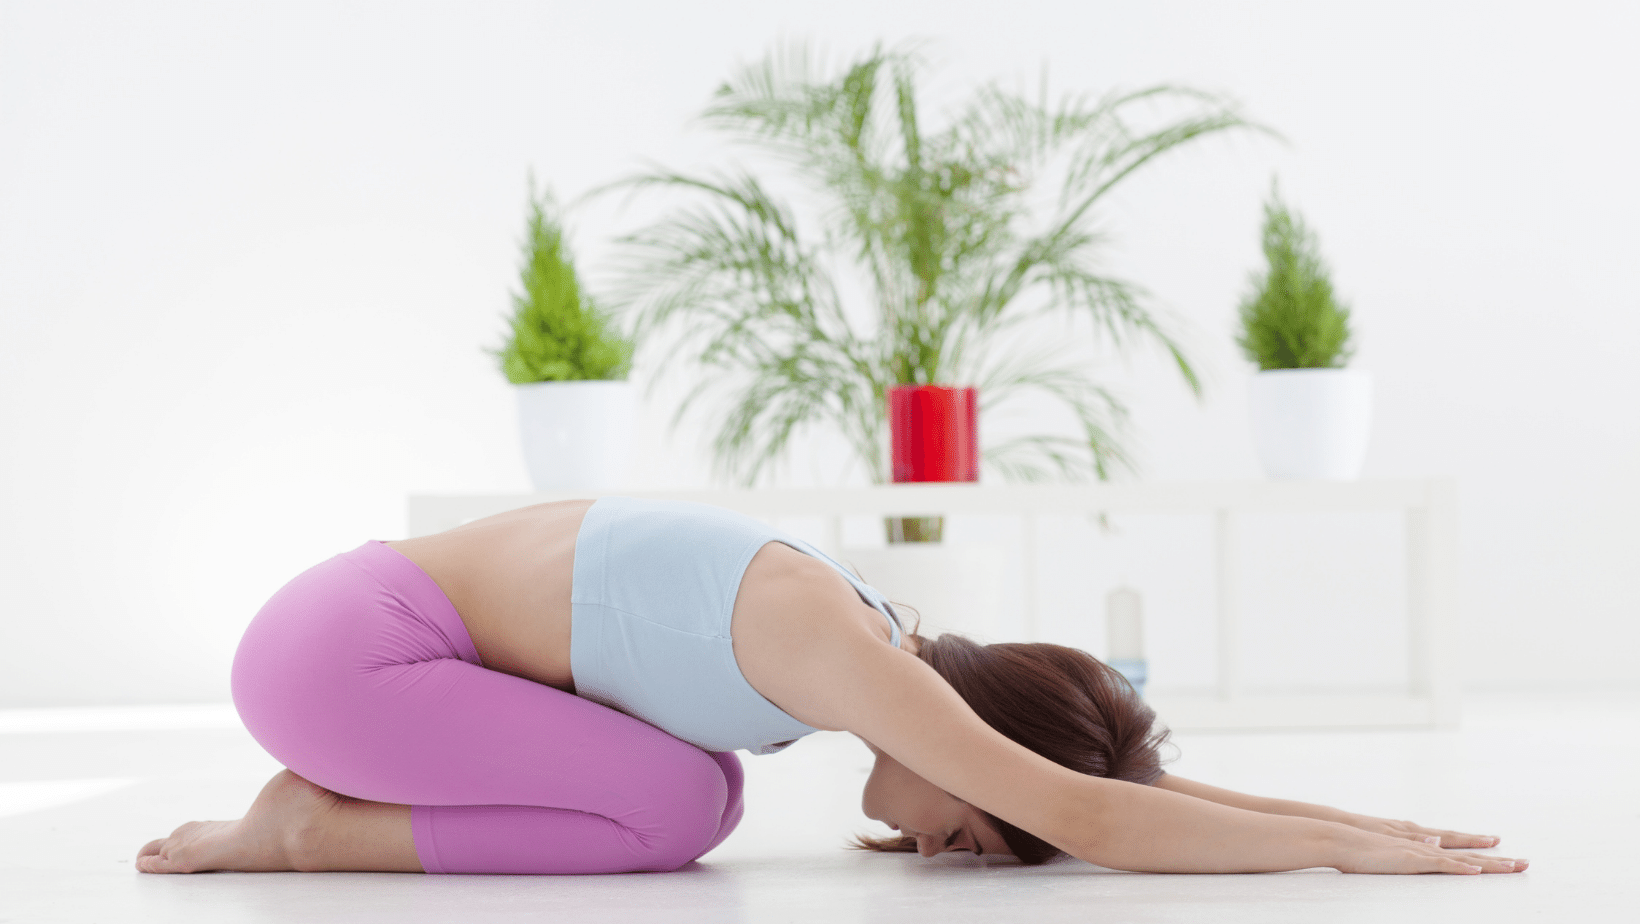 Yoga Poses for Healthy Spine